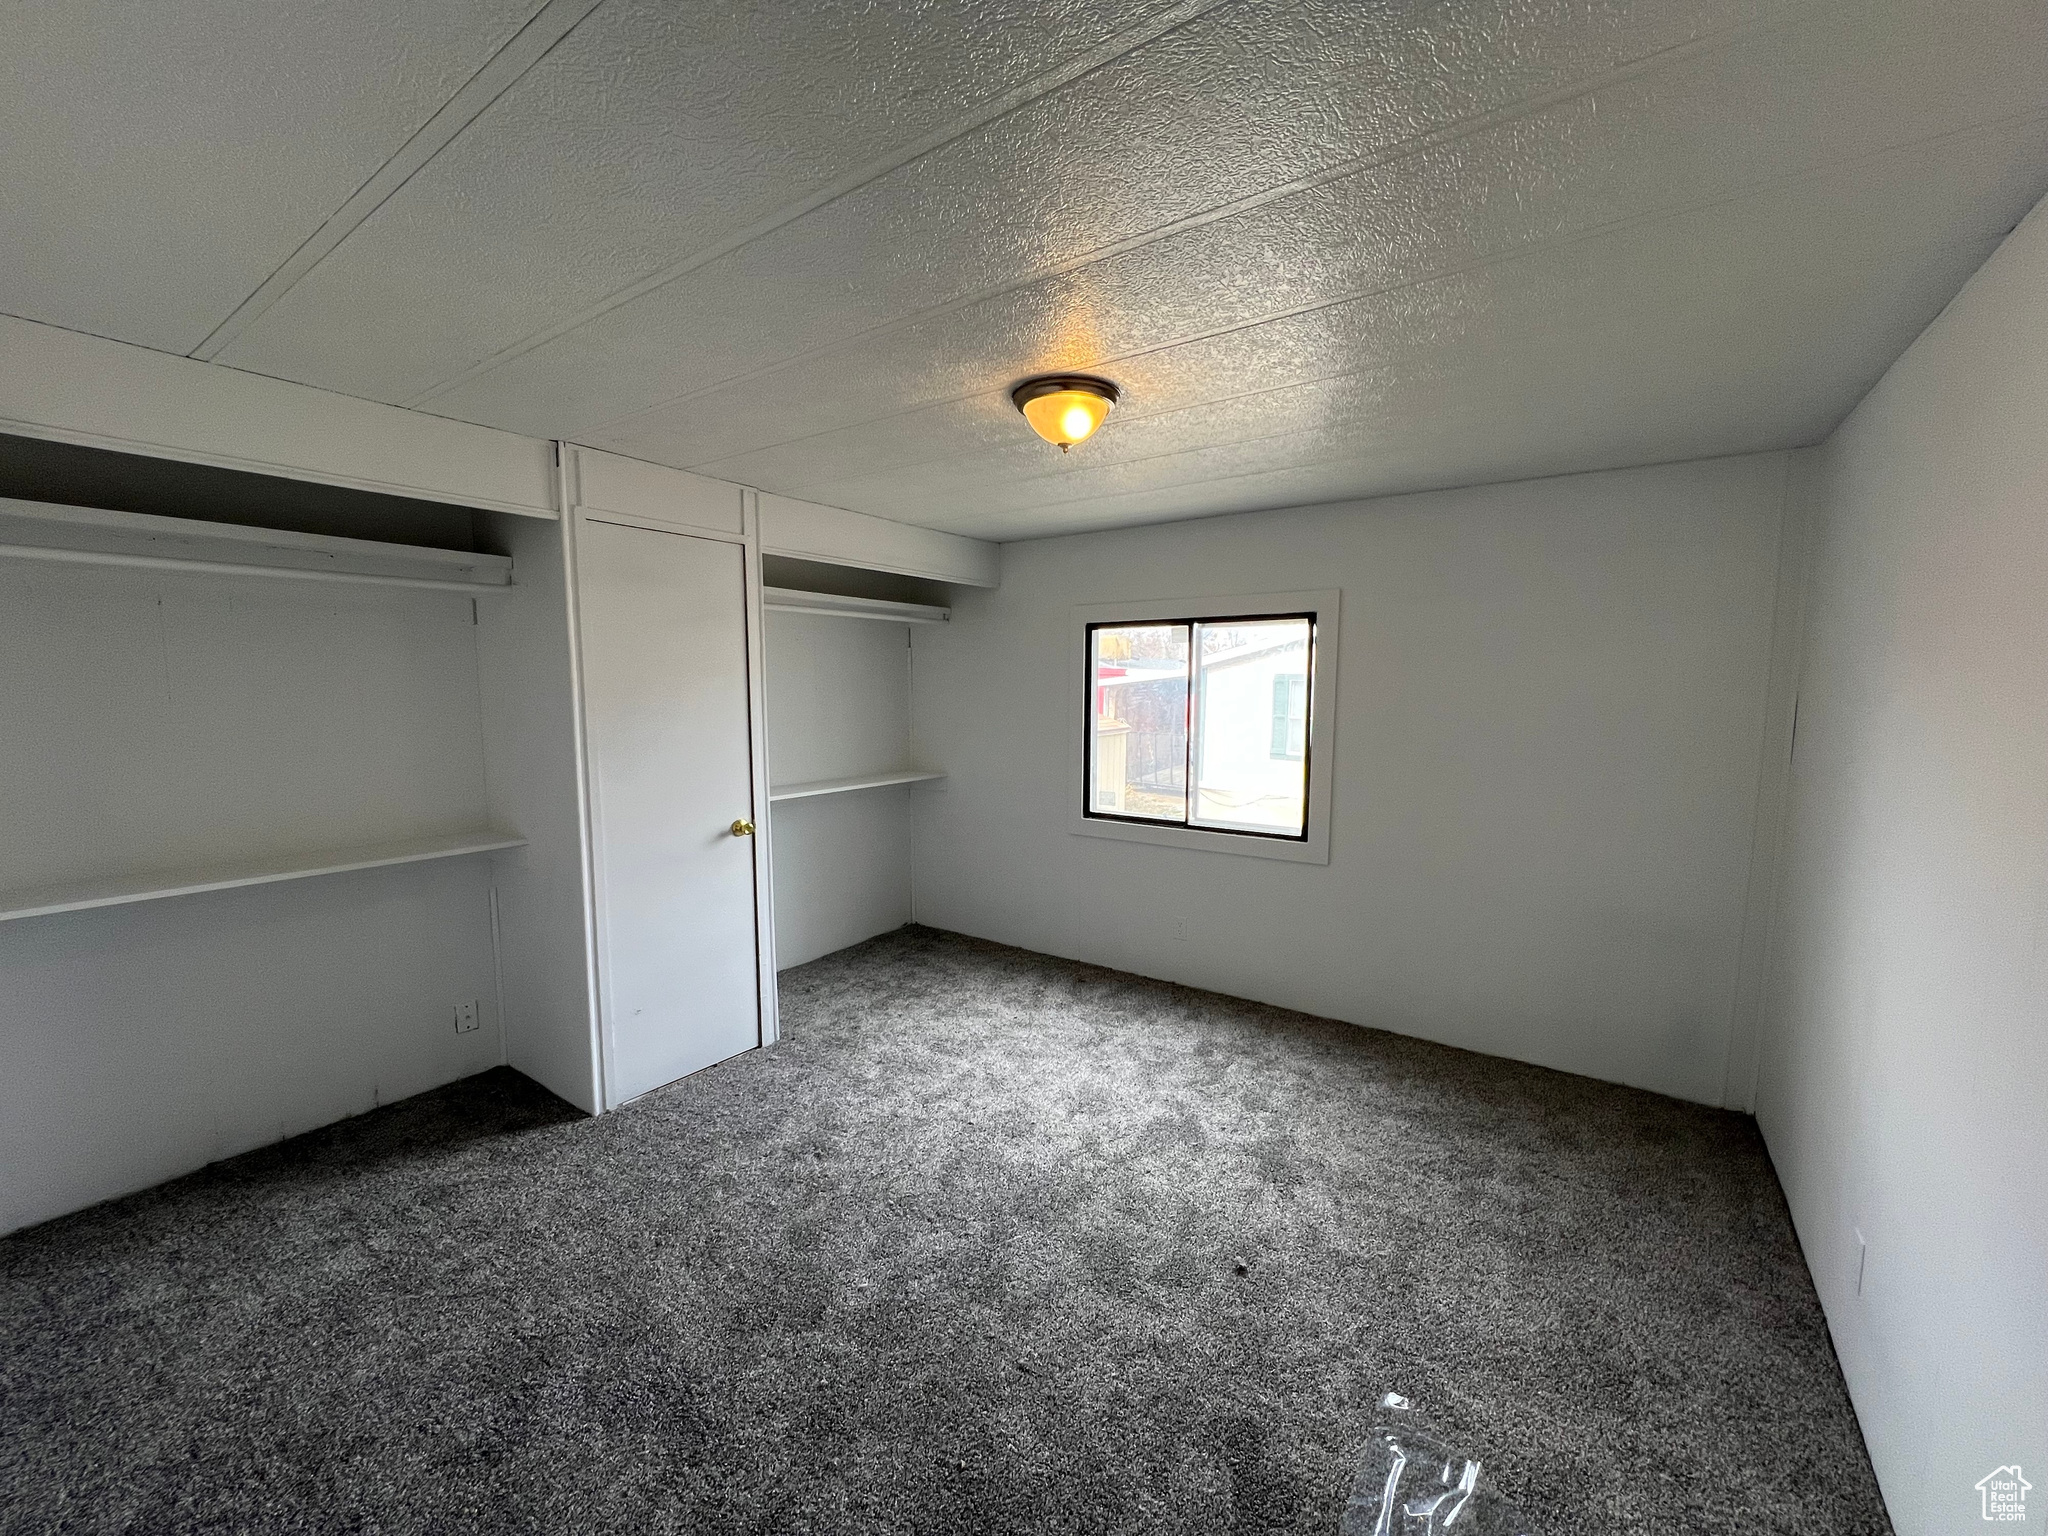 Unfurnished bedroom with dark carpet and a textured ceiling